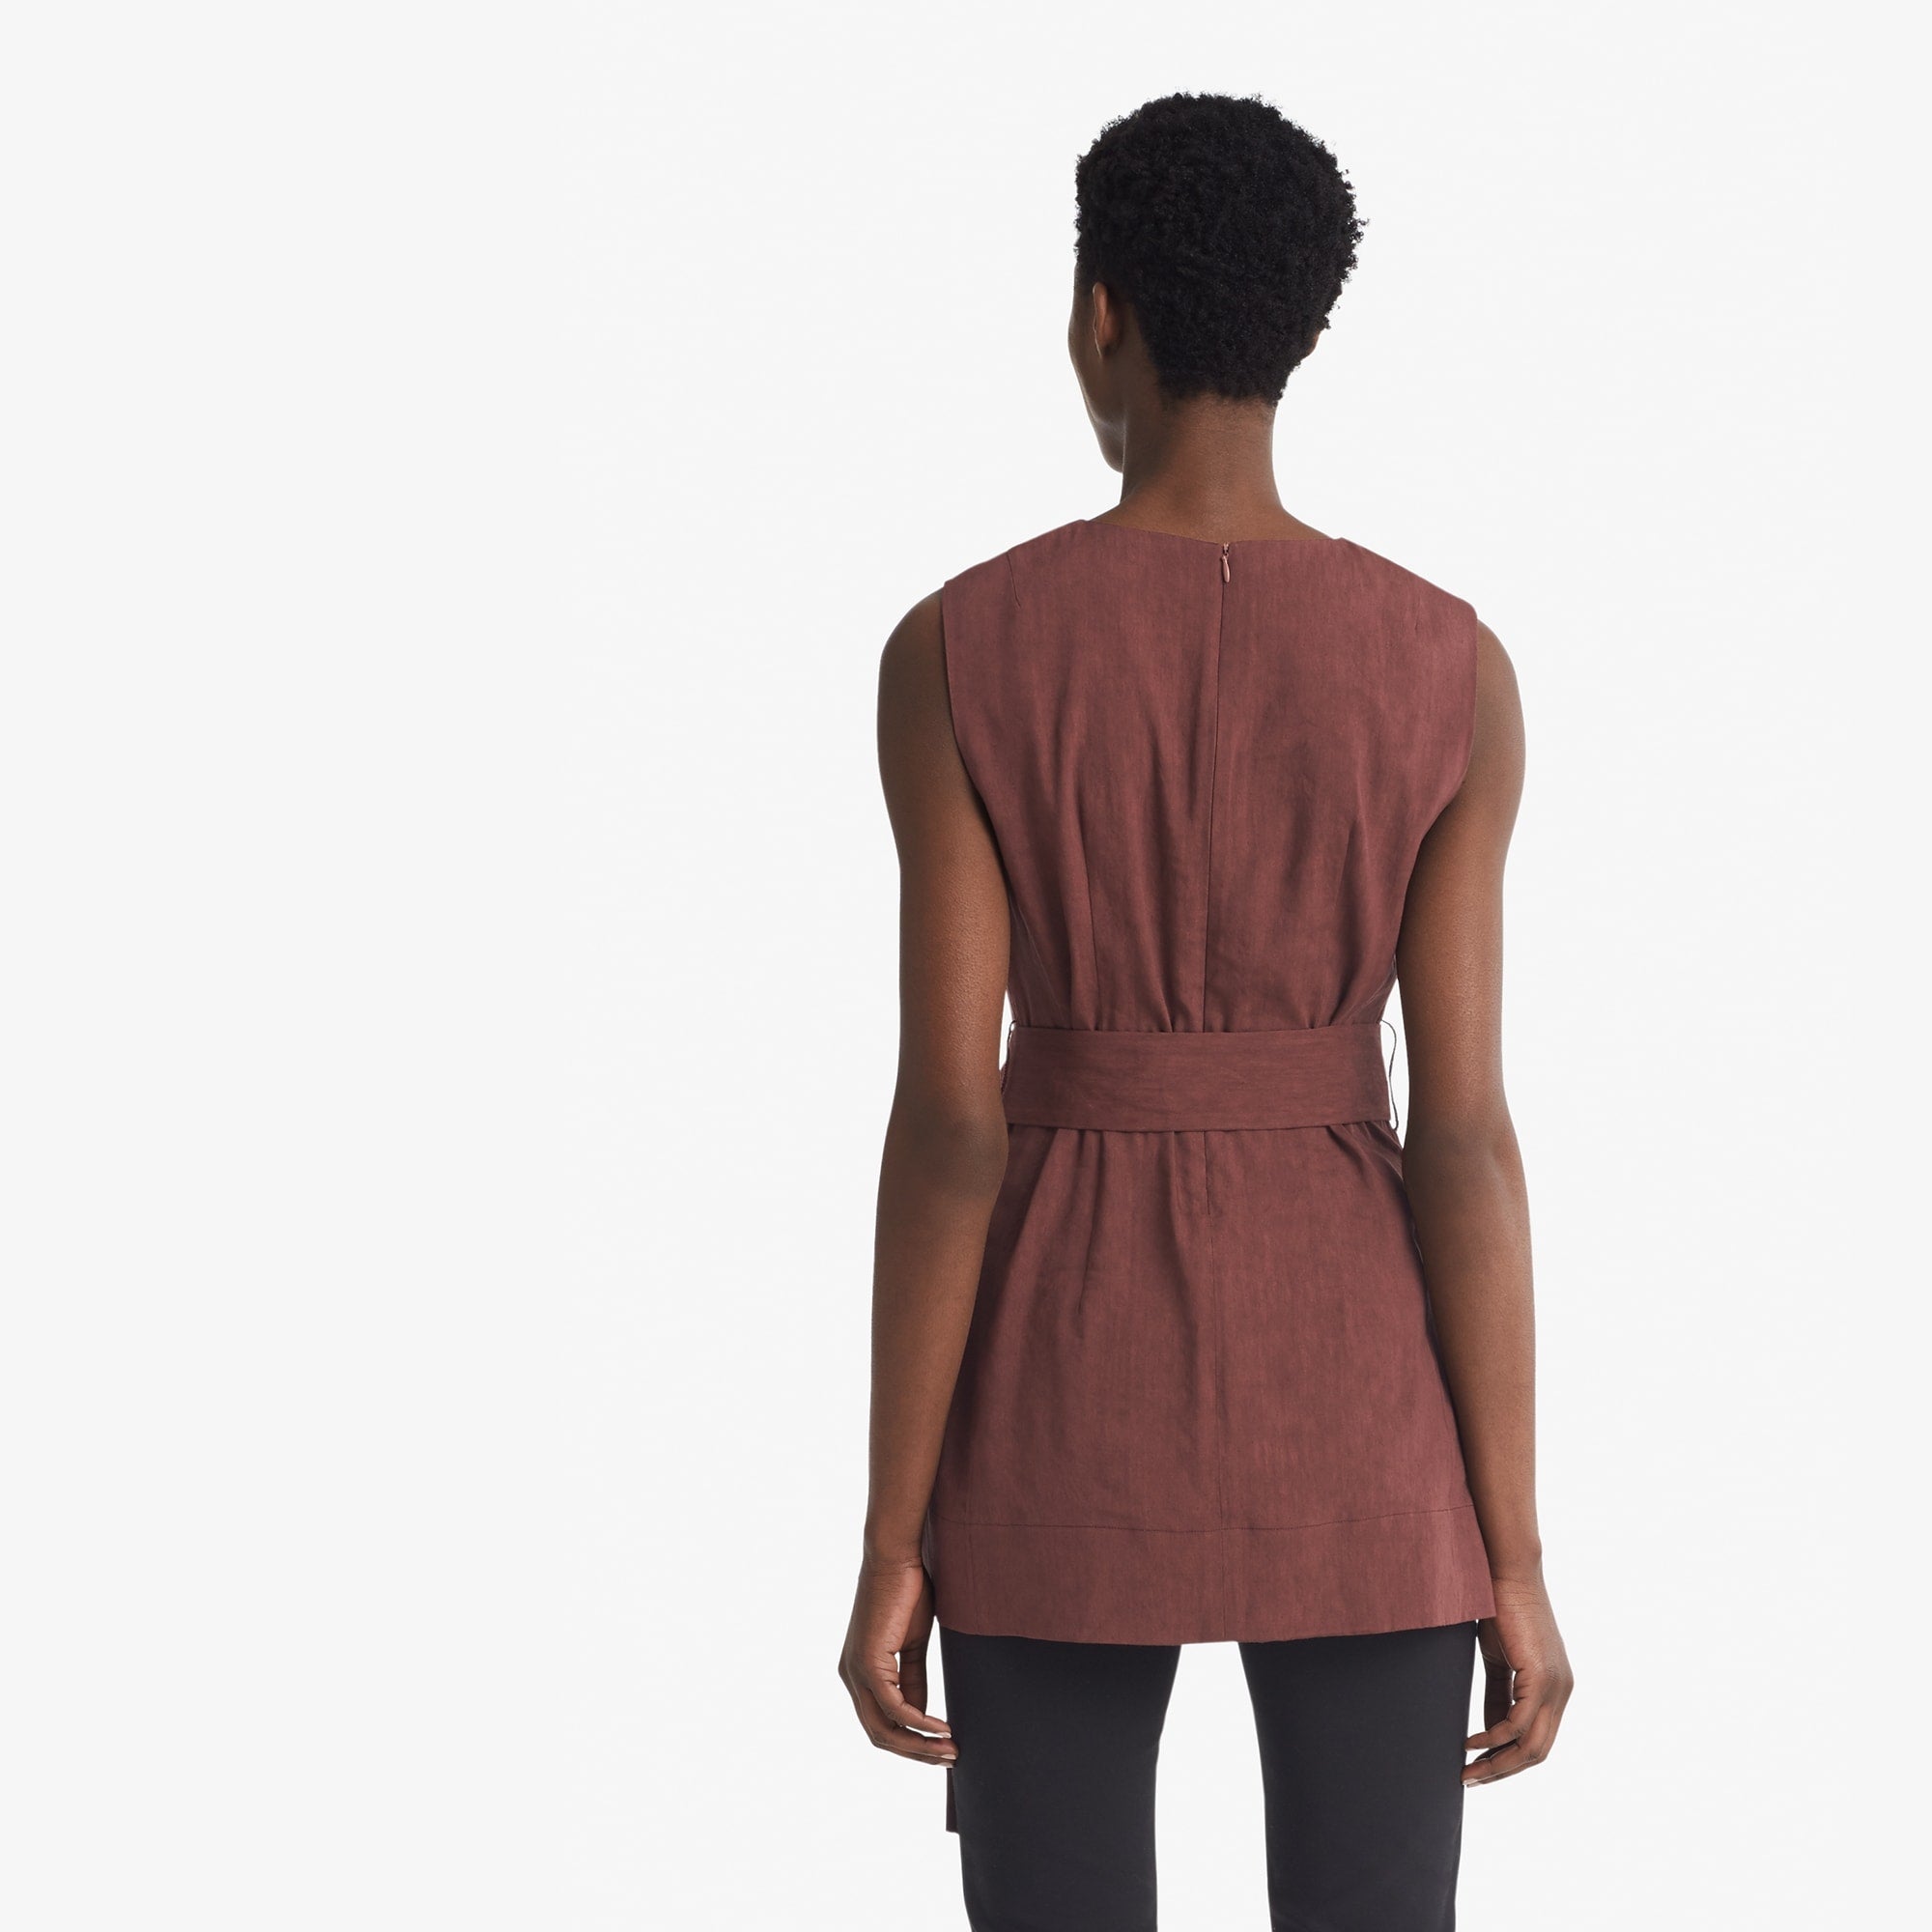 Back image of a woman standing wearing the Angelina top stretch linen in sumac